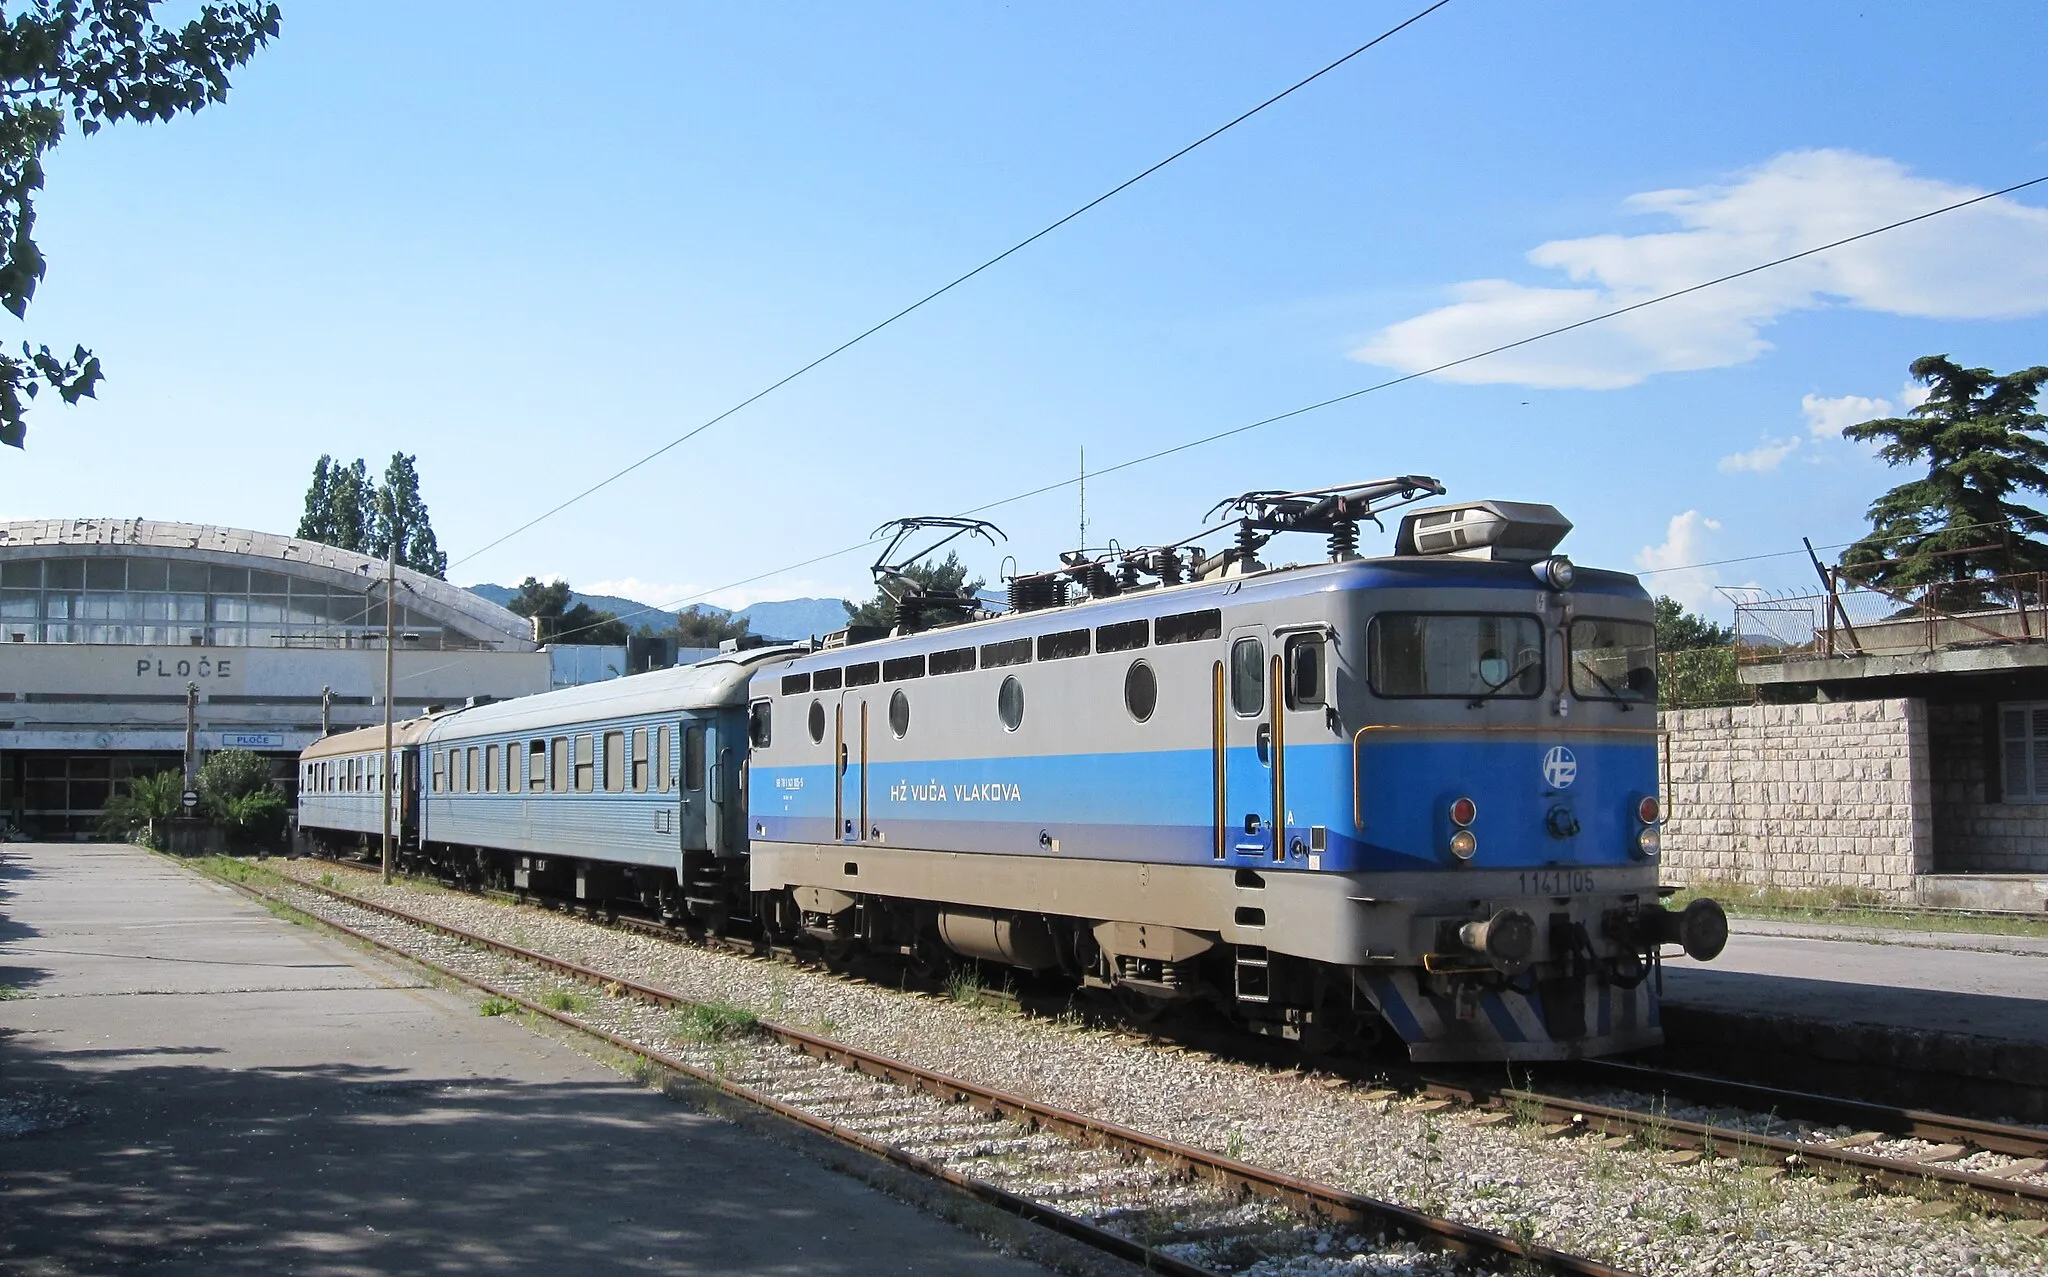 Photo showing: 1141105 at the Adriatic coastal town of Ploče being the end of a short section of line run by Croatian Railways (HŽ) but cut off from the rest of the network. Seen on 11 May 2011 with two former Swedish Railways coaches on train 390, 16:52 Ploče to Sarajevo. The loco would work as fat as the Bosnian border of Čapljina before continuing on to Mostar for a rail replacement bus to Konjic.